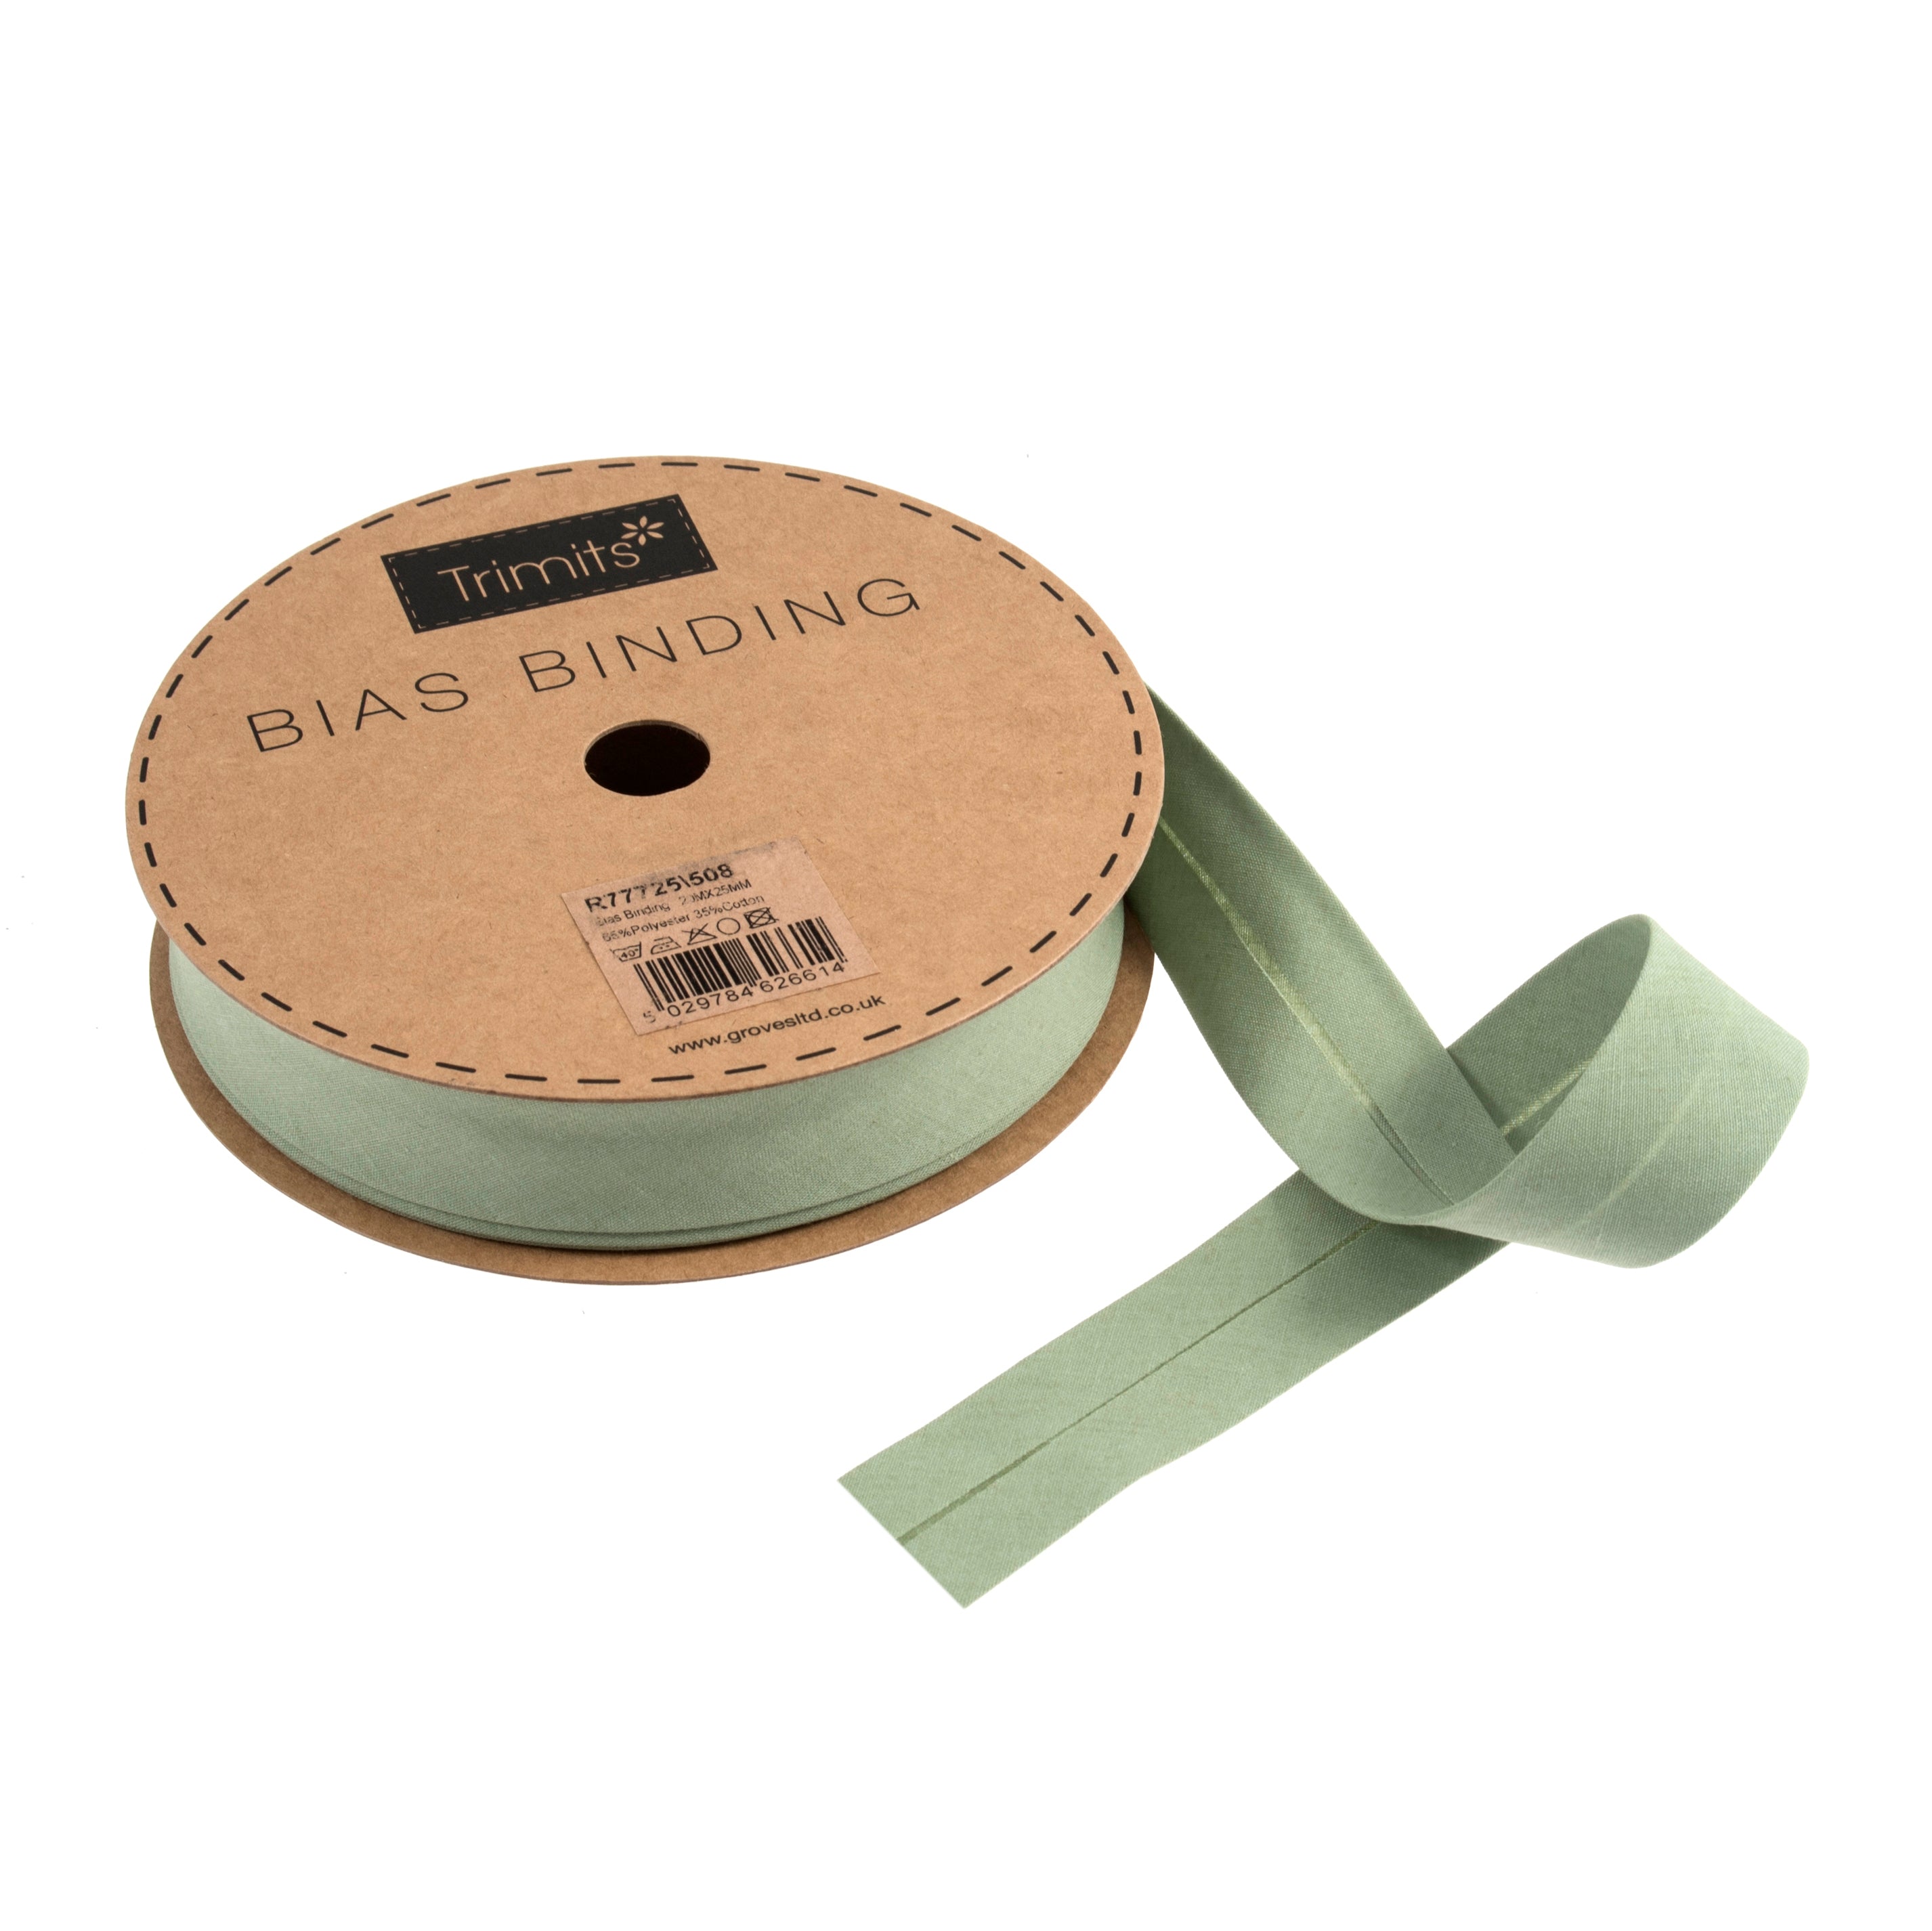 20m roll of Sage Bias Binding | 25mm width from Jaycotts Sewing Supplies